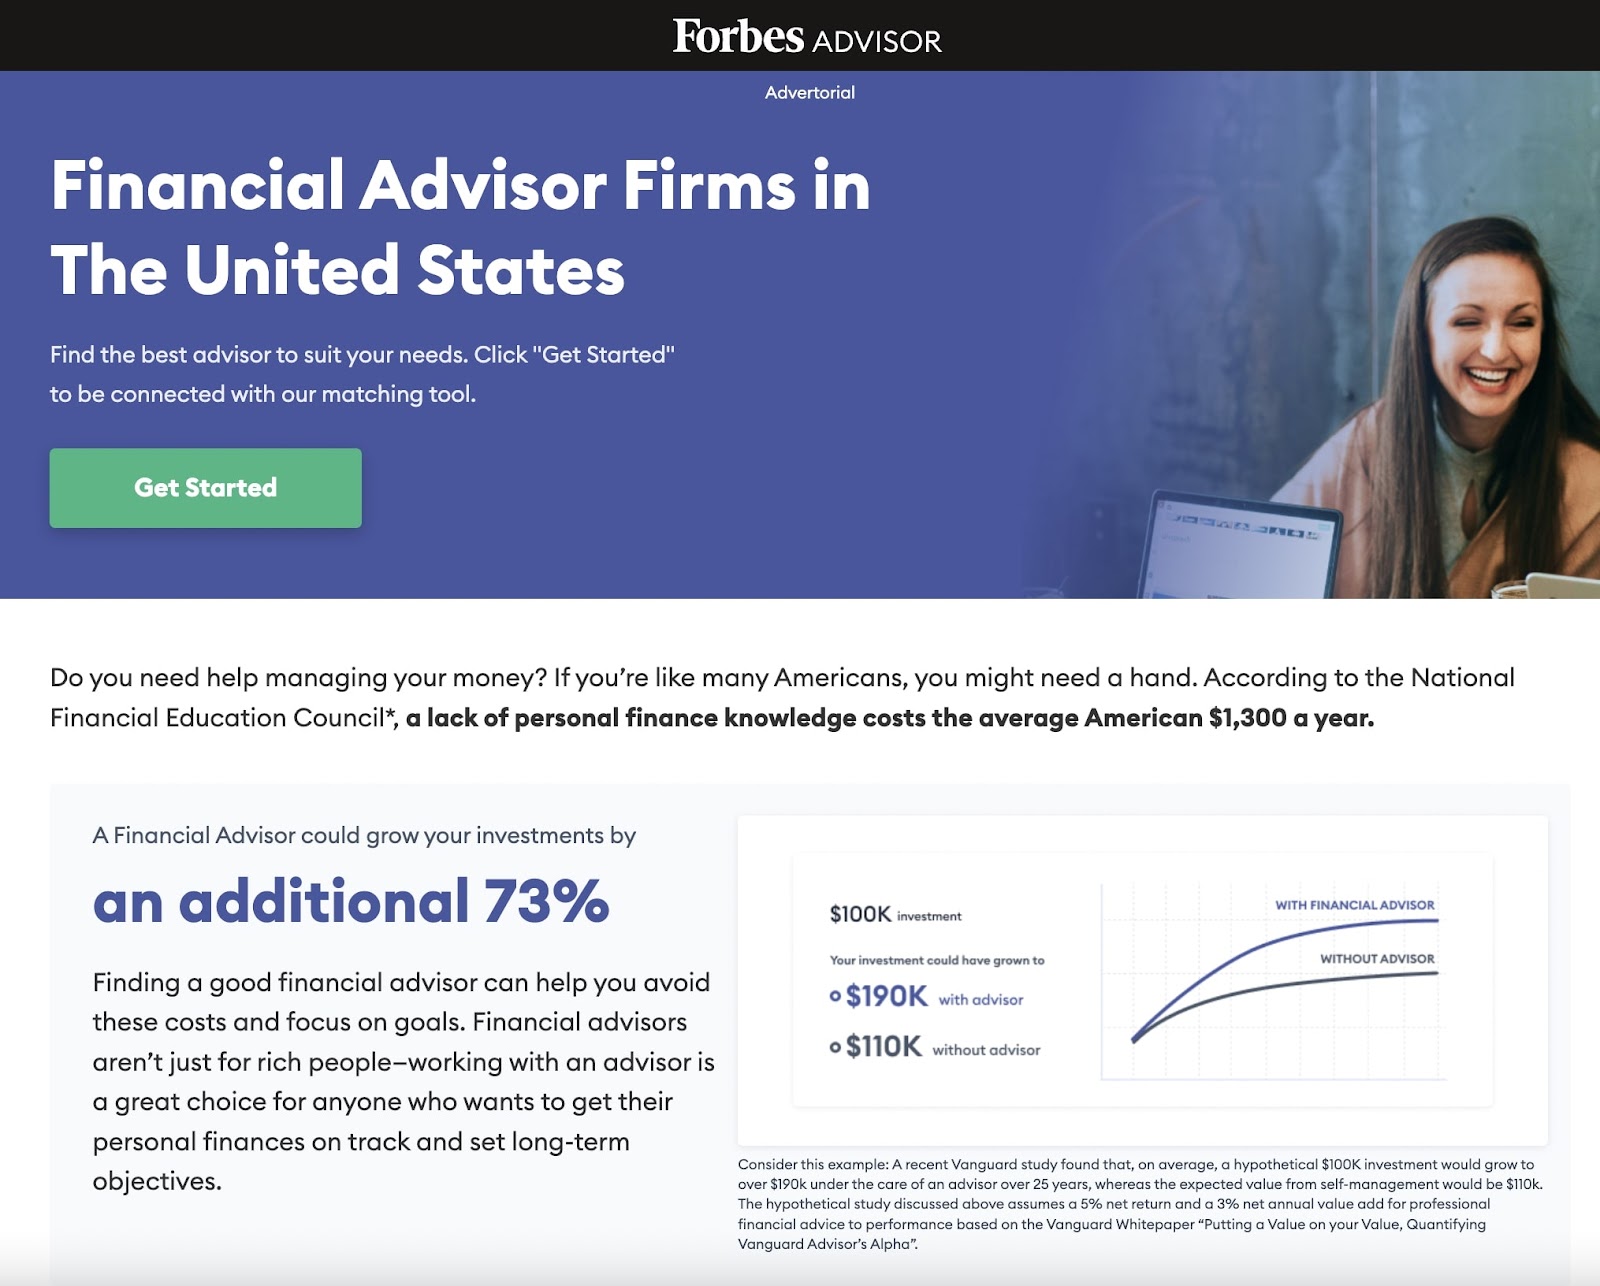 Smiling woman sat at a laptop alongside the benefits of choosing a financial advisor